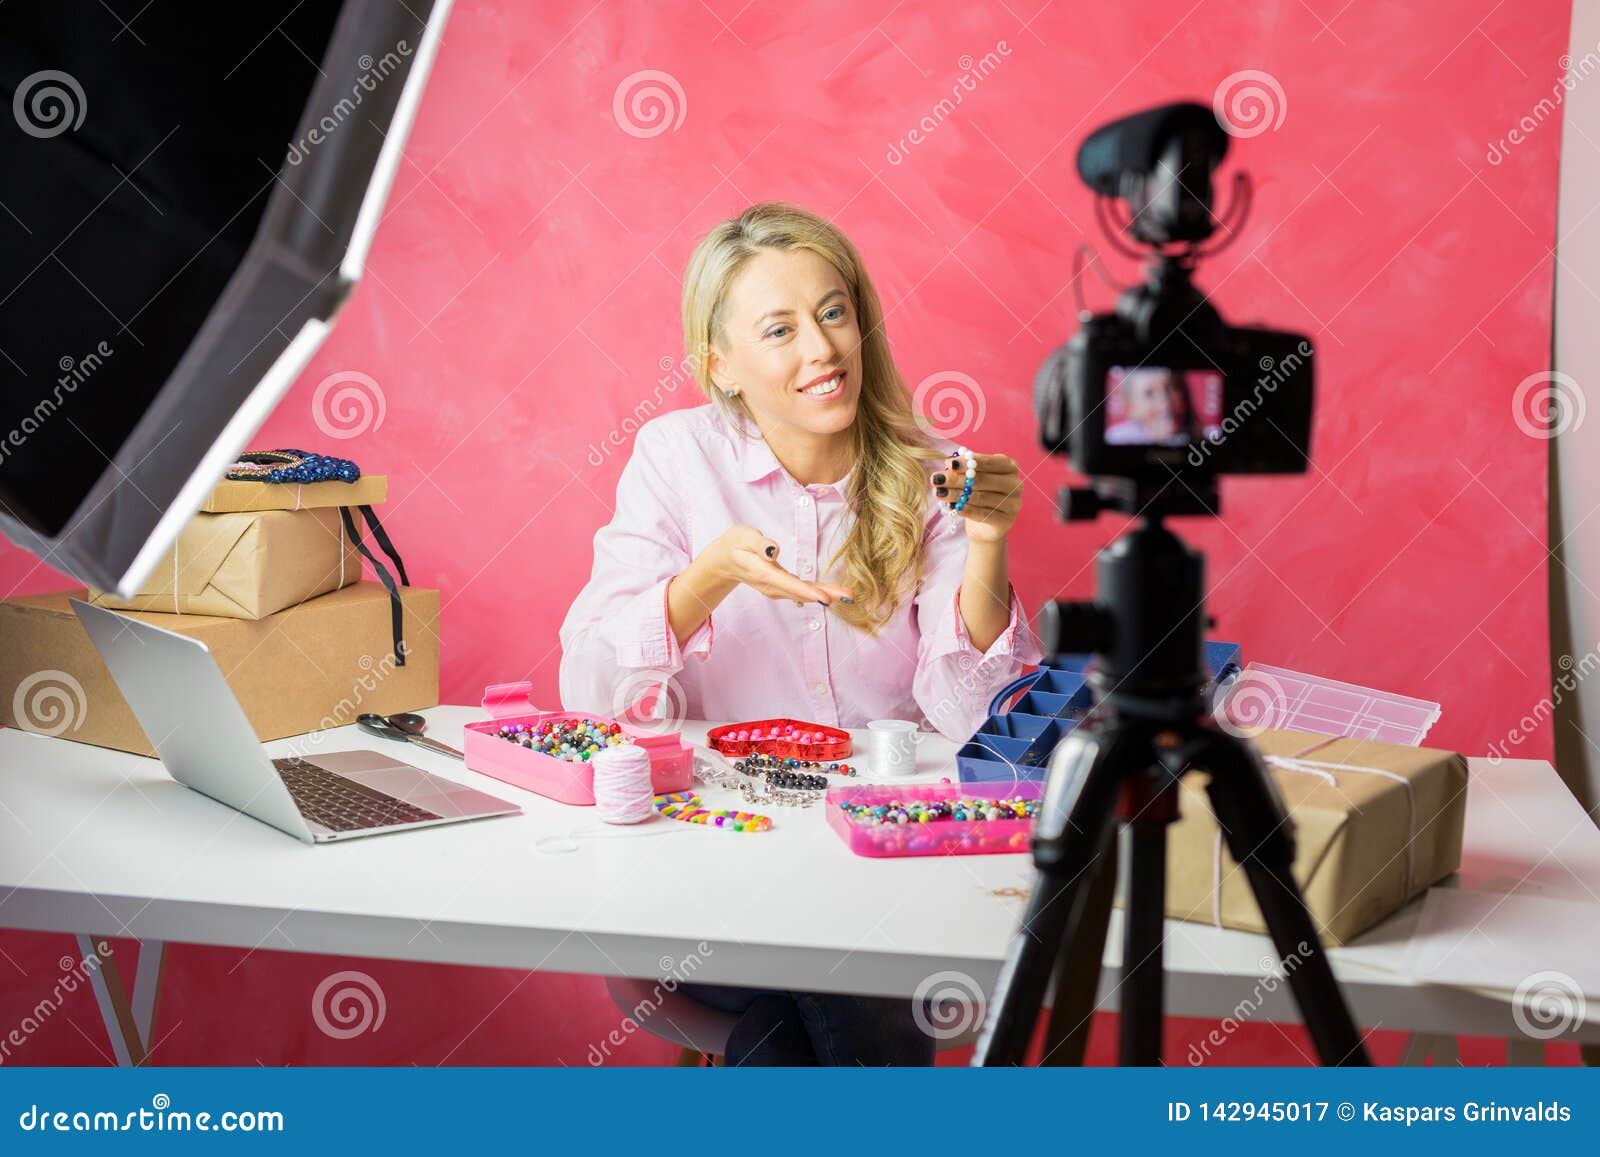 social media influencer young woman recording video blog with instructional how-to tutorial for making your own jewellery